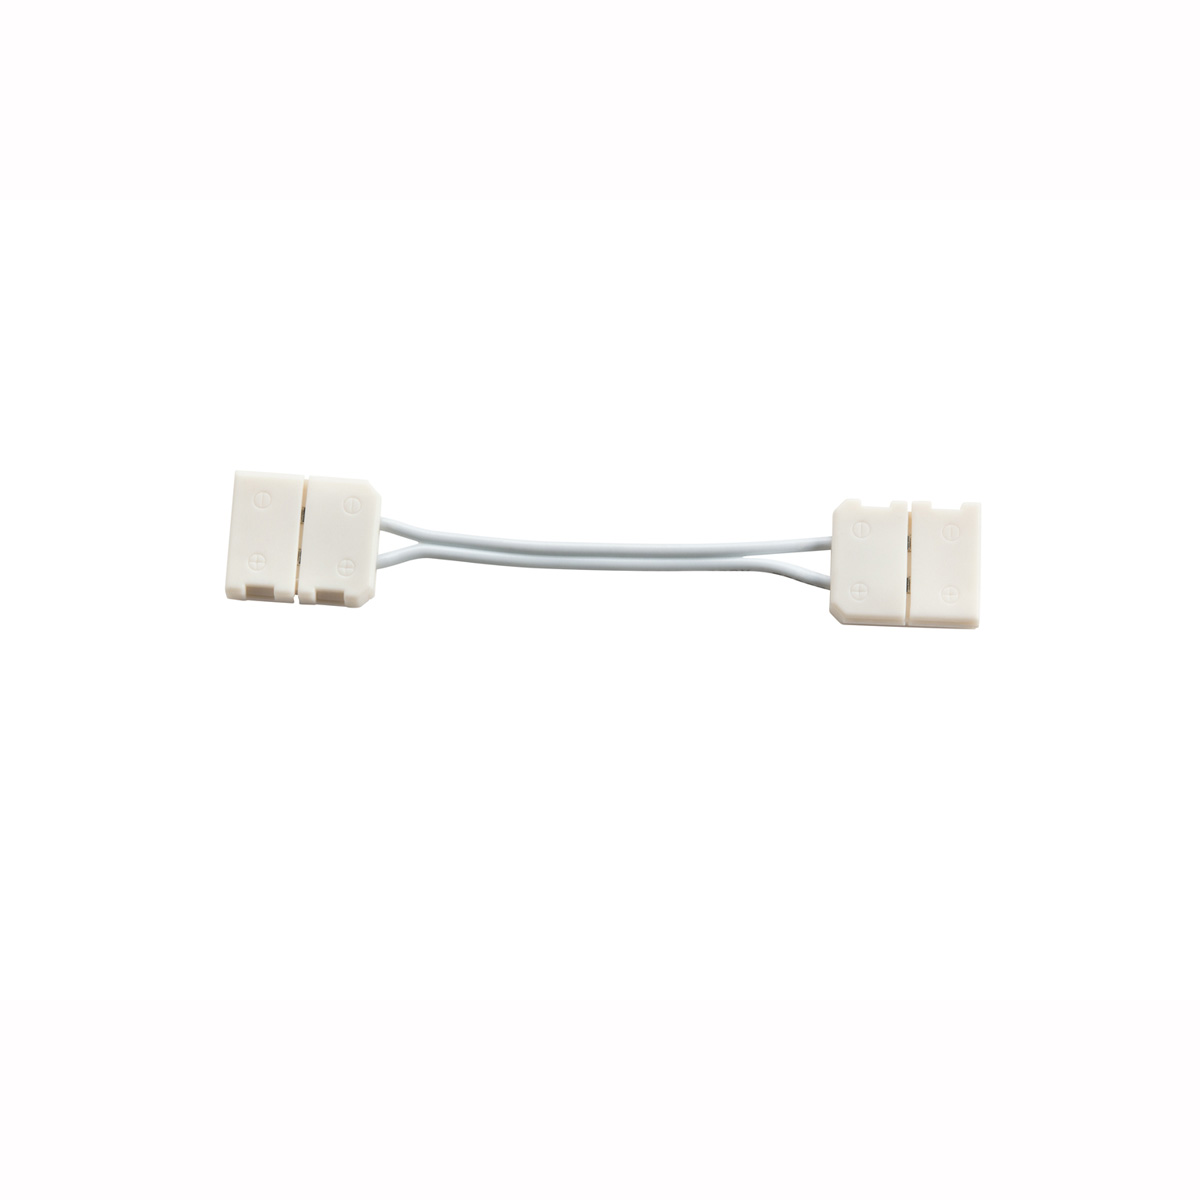 A lighting support basic, this LED tape 2 inch interconnect accessory features a versatile White finish.